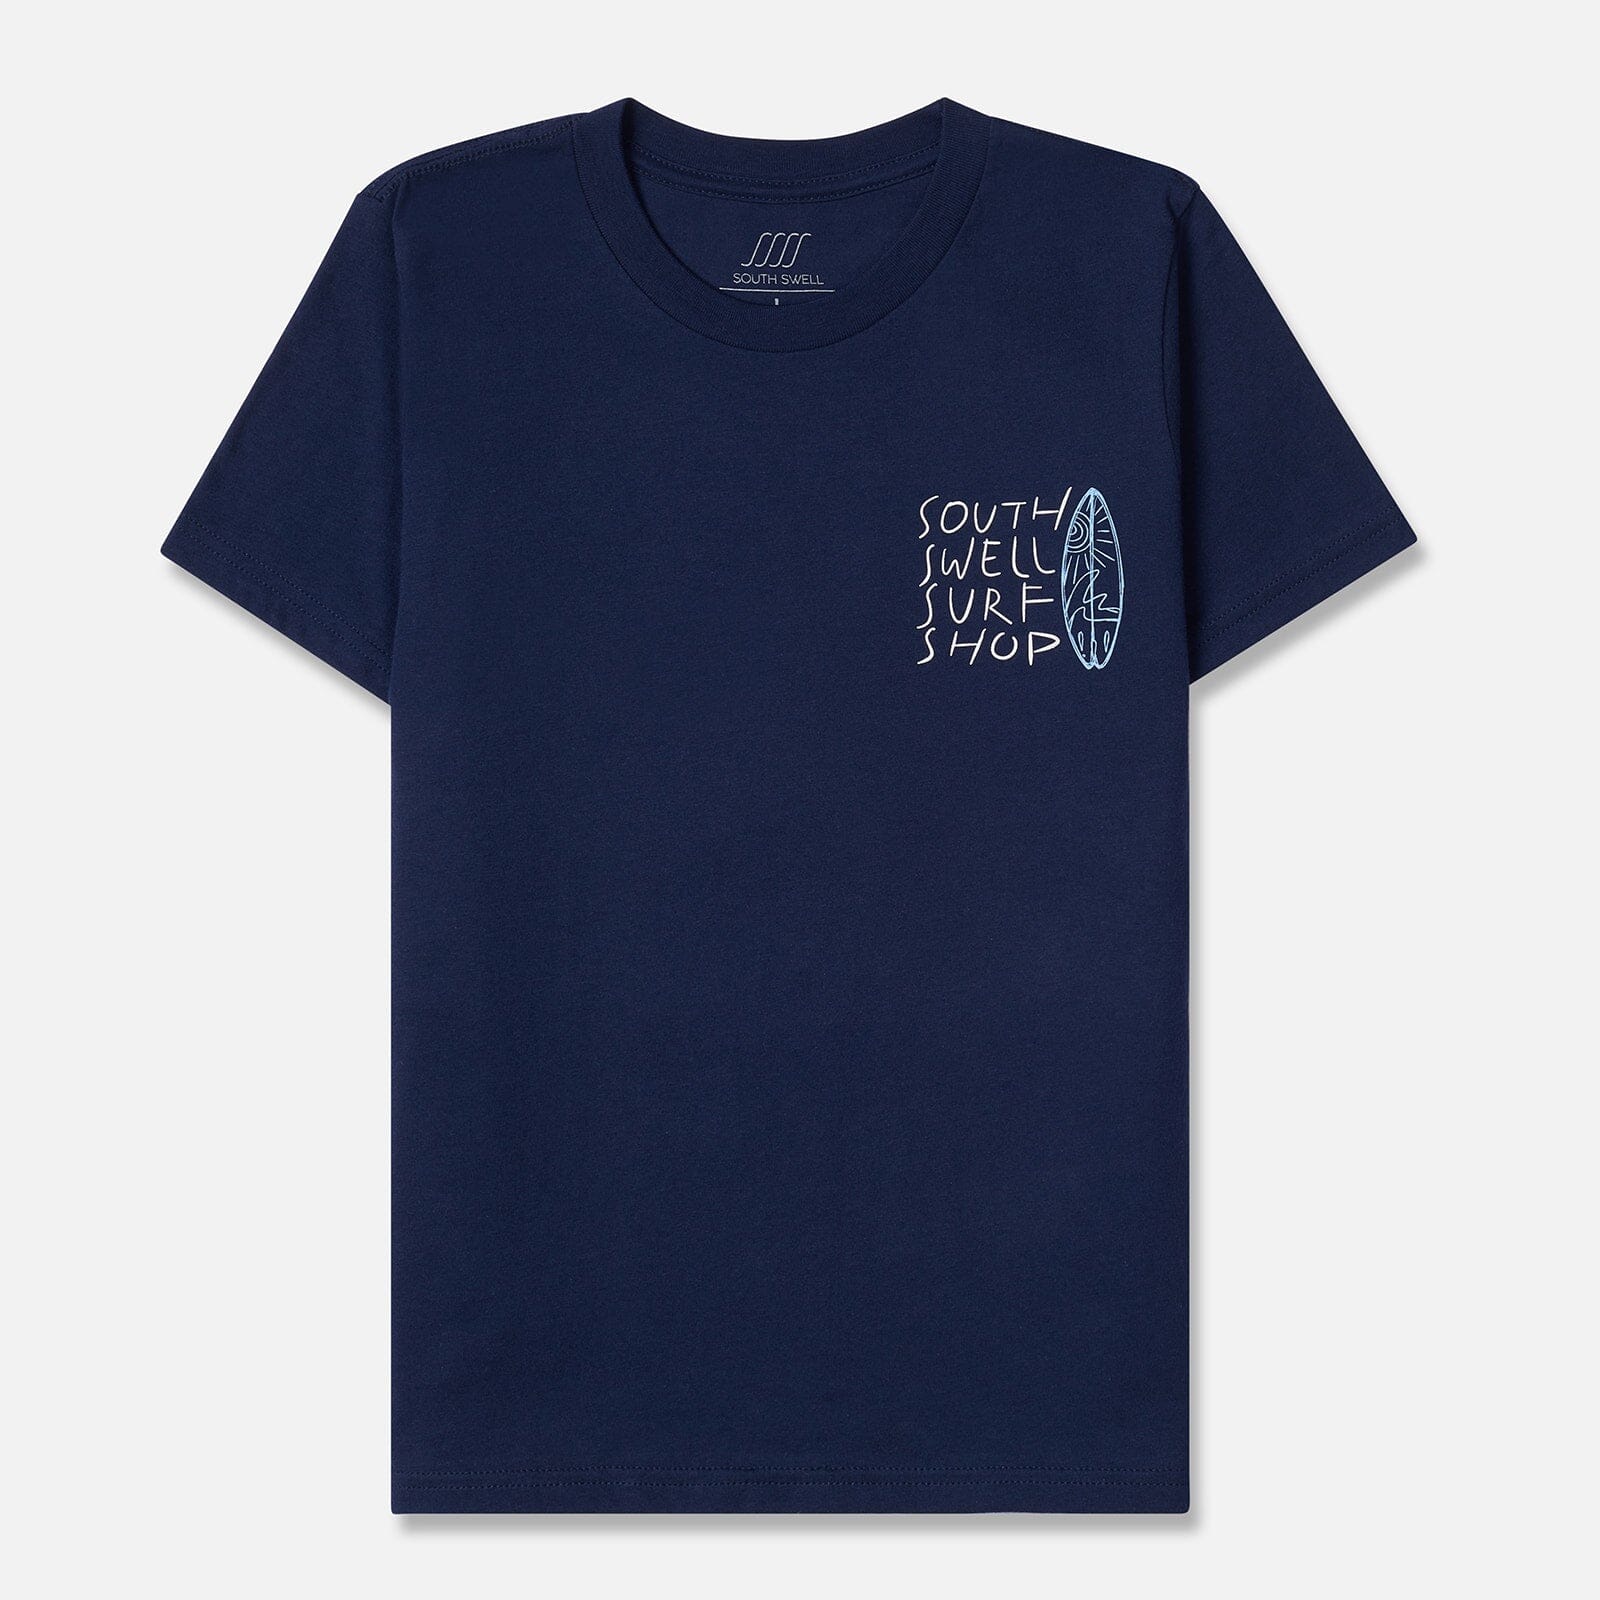 South Swell Youth Grom Shortsleeve Navy